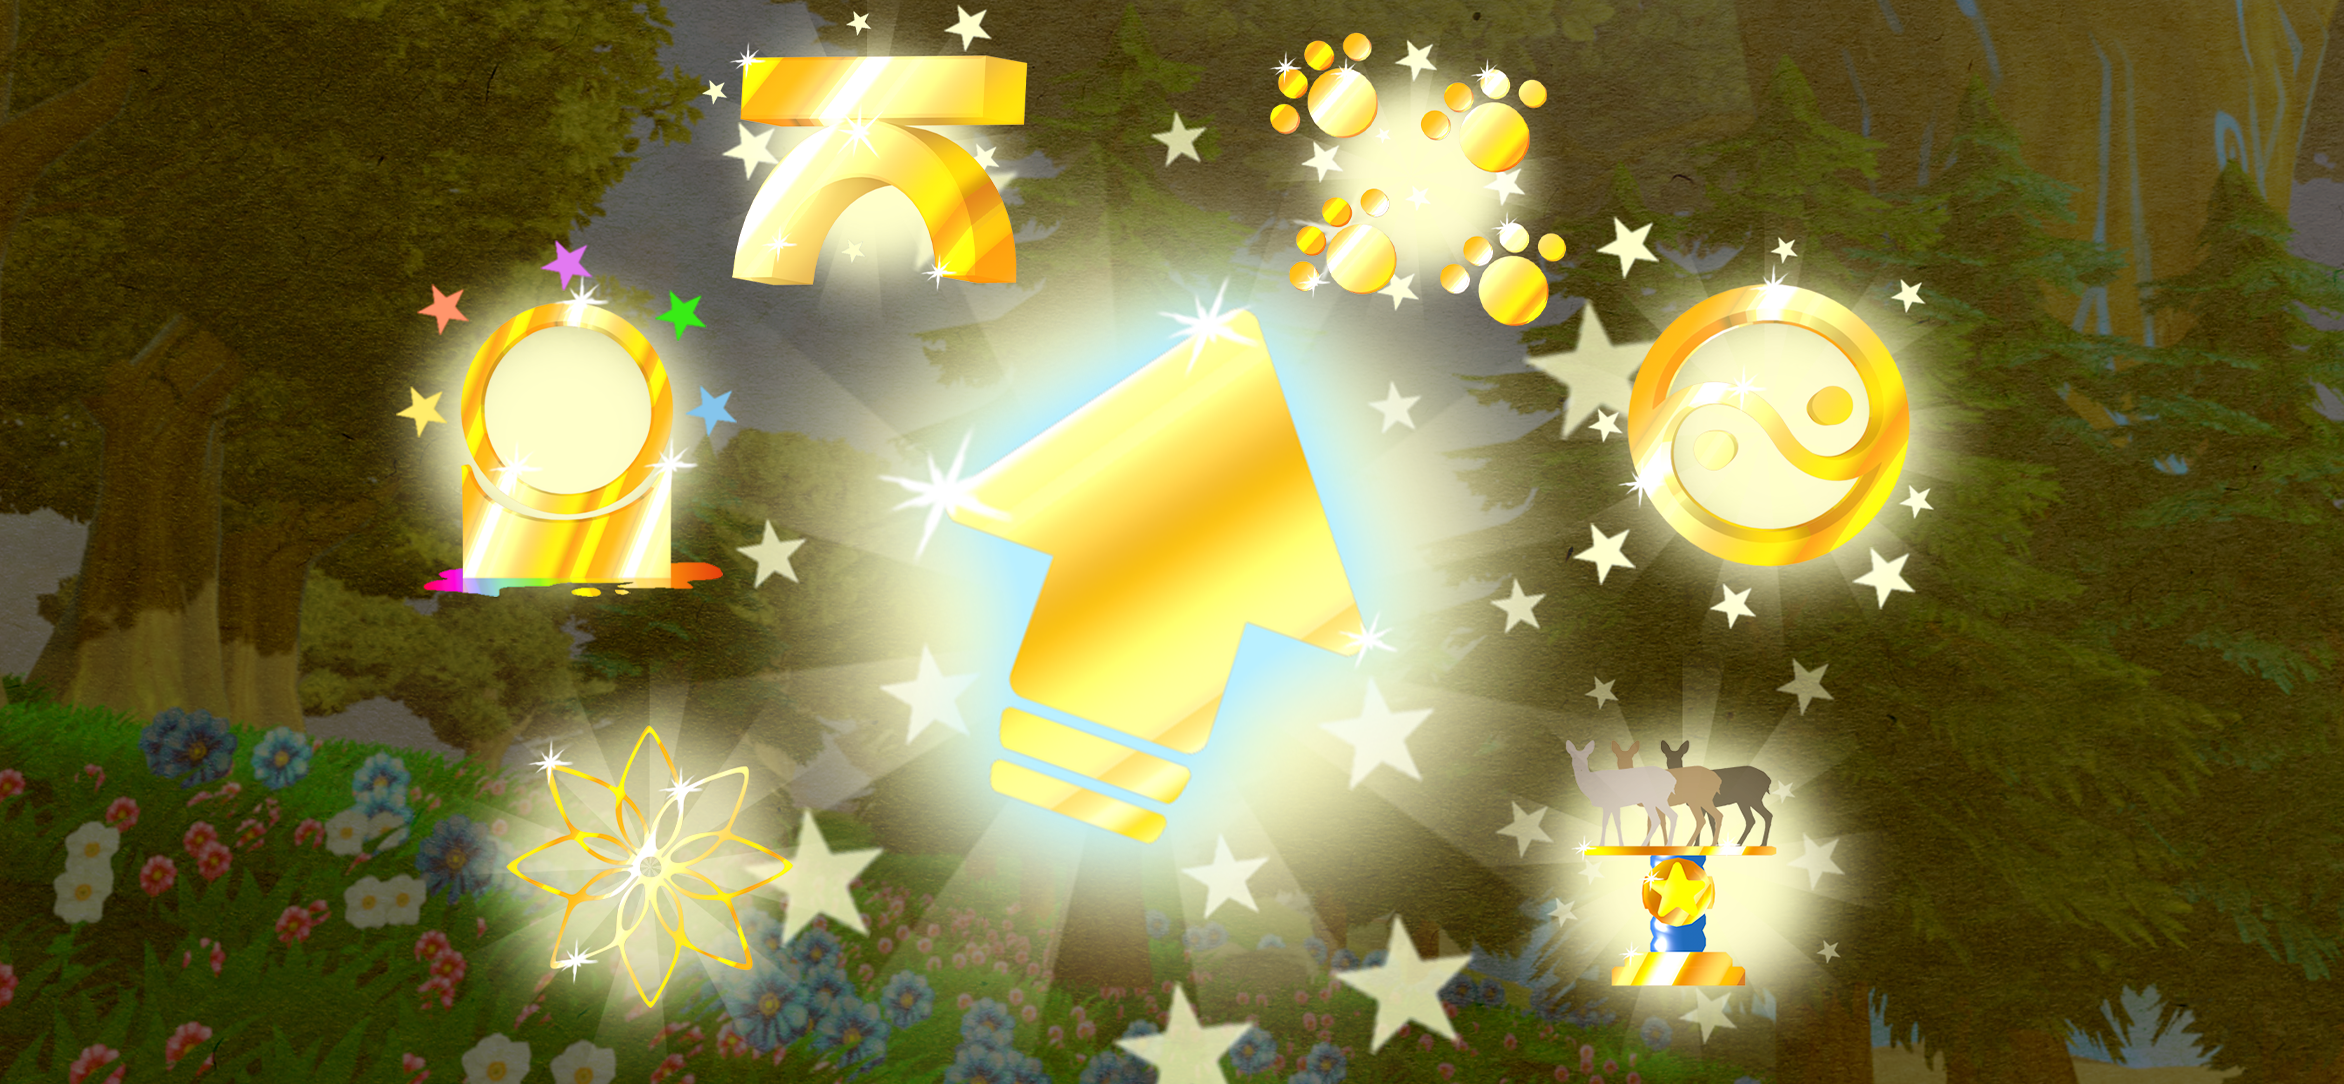 New Achievement Tiers - Discover even more in Azoa with over 50  new achievement stages including exciting challenges and rewards to celebrate your progress and accomplishments within the app.